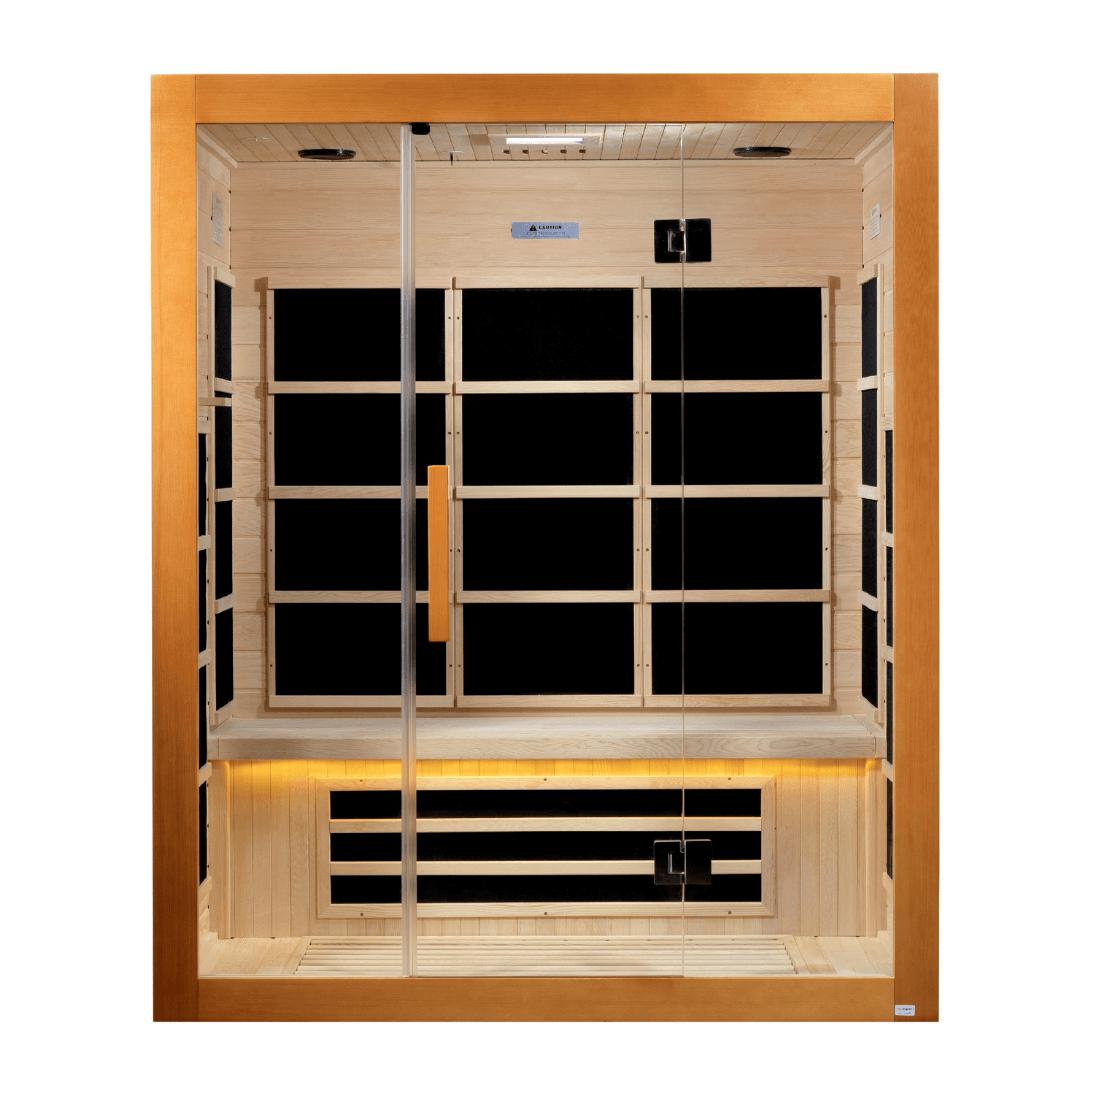 Dynamic "Mersaille" 3-person Ultra Low EMF Far Infrared Sauna, DYN-6308-01 Front Panels and Door